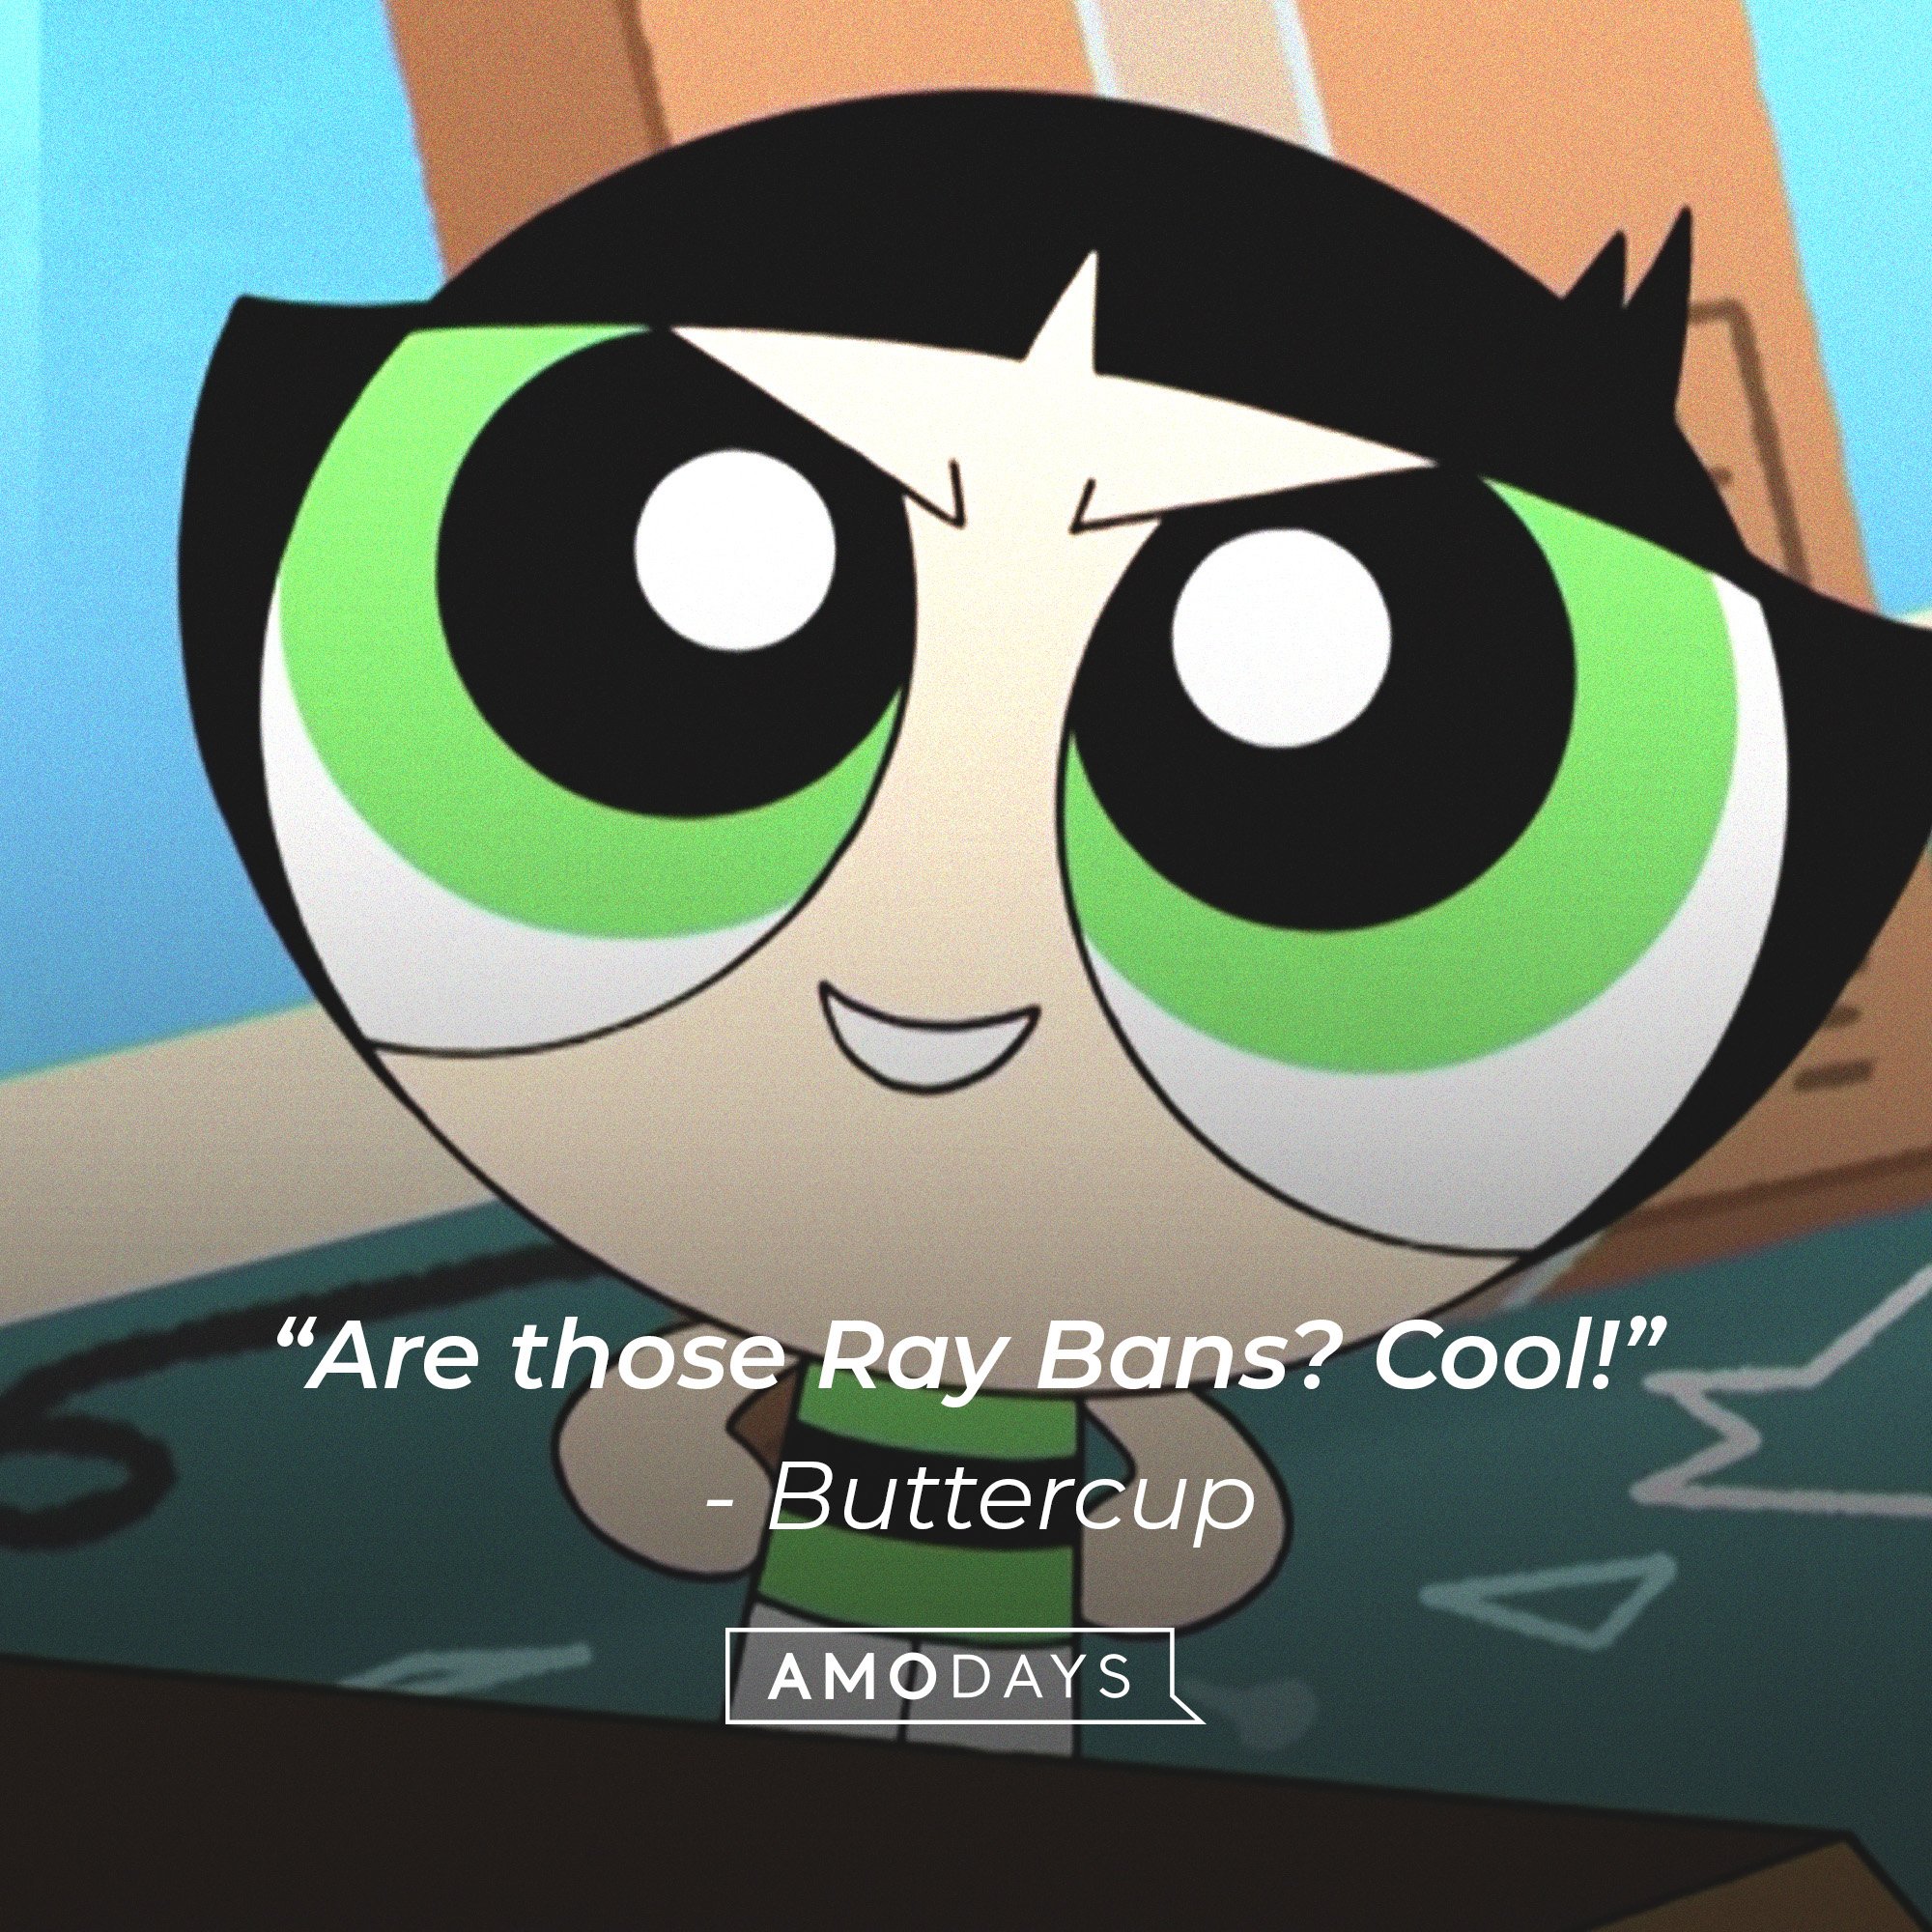 Buttercup’s quote: “Are those Ray Bans? Cool!” | Image: AmoDays